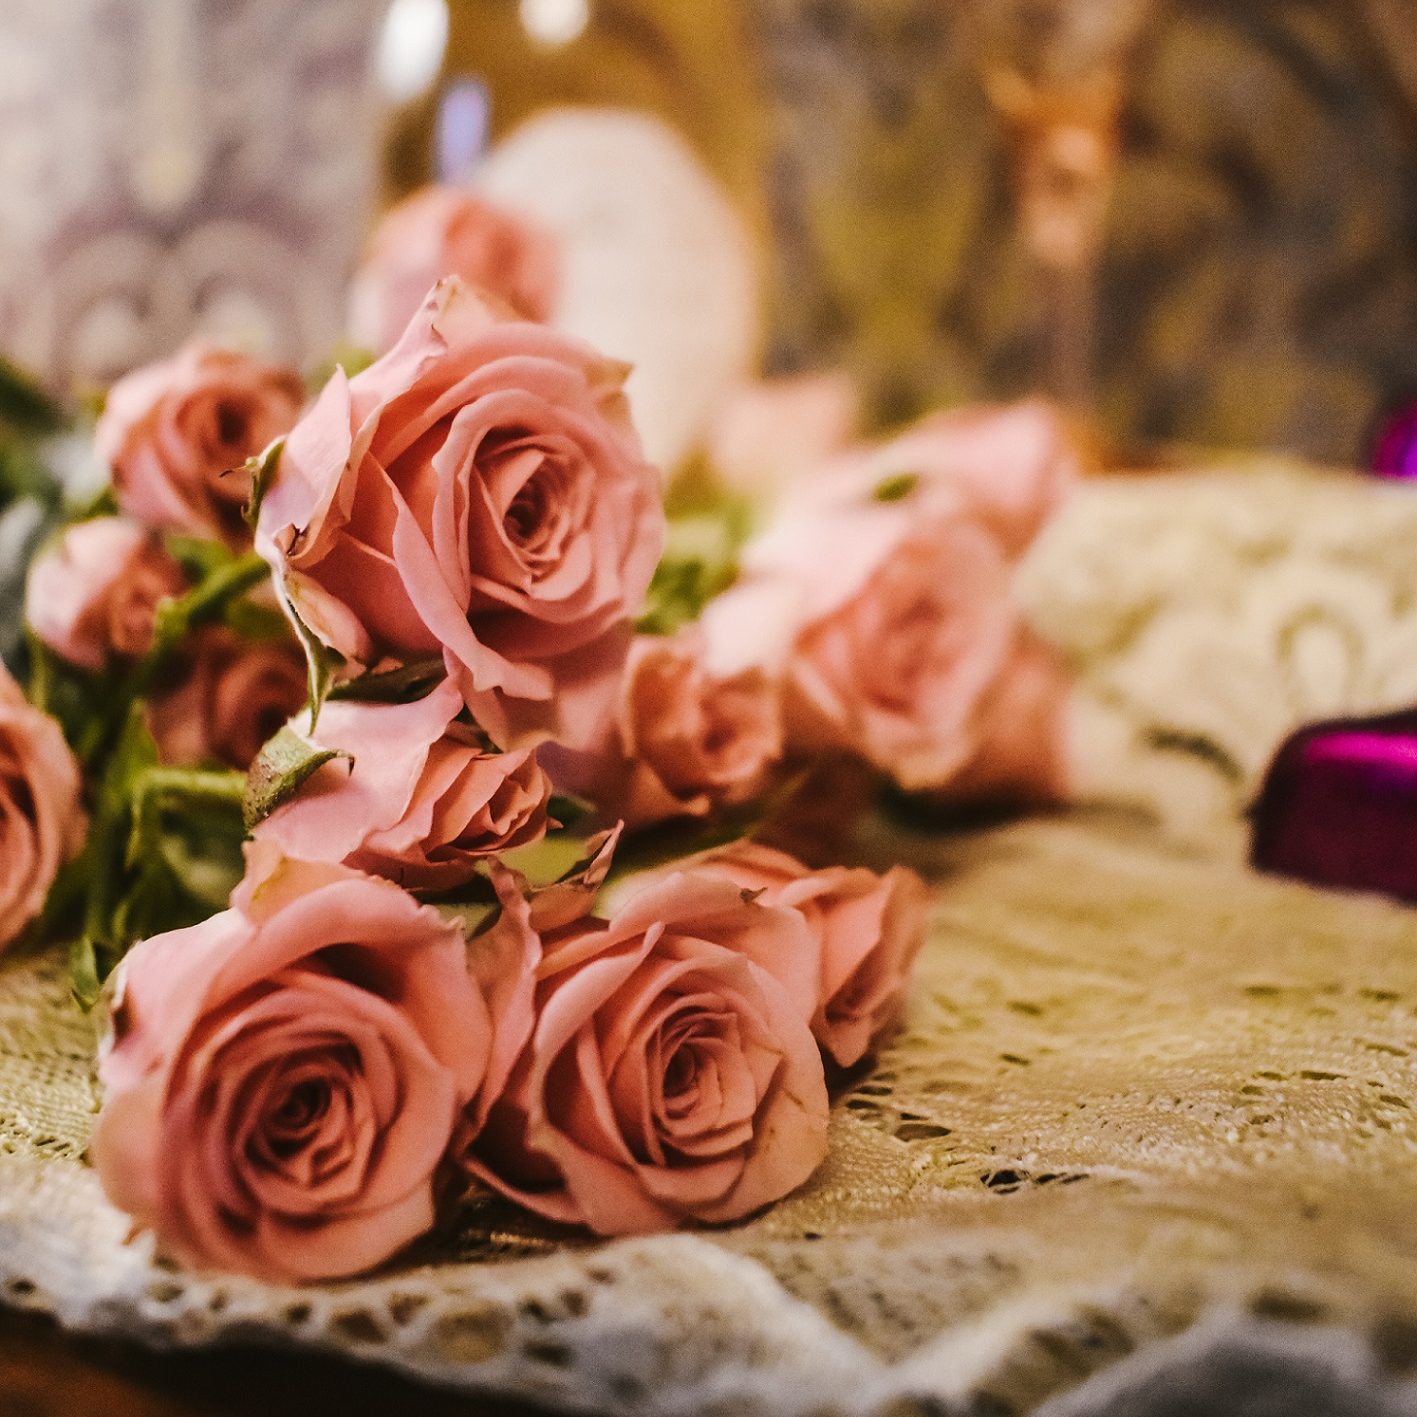 close up of a bundle of pink roses on a white lace tablecloth